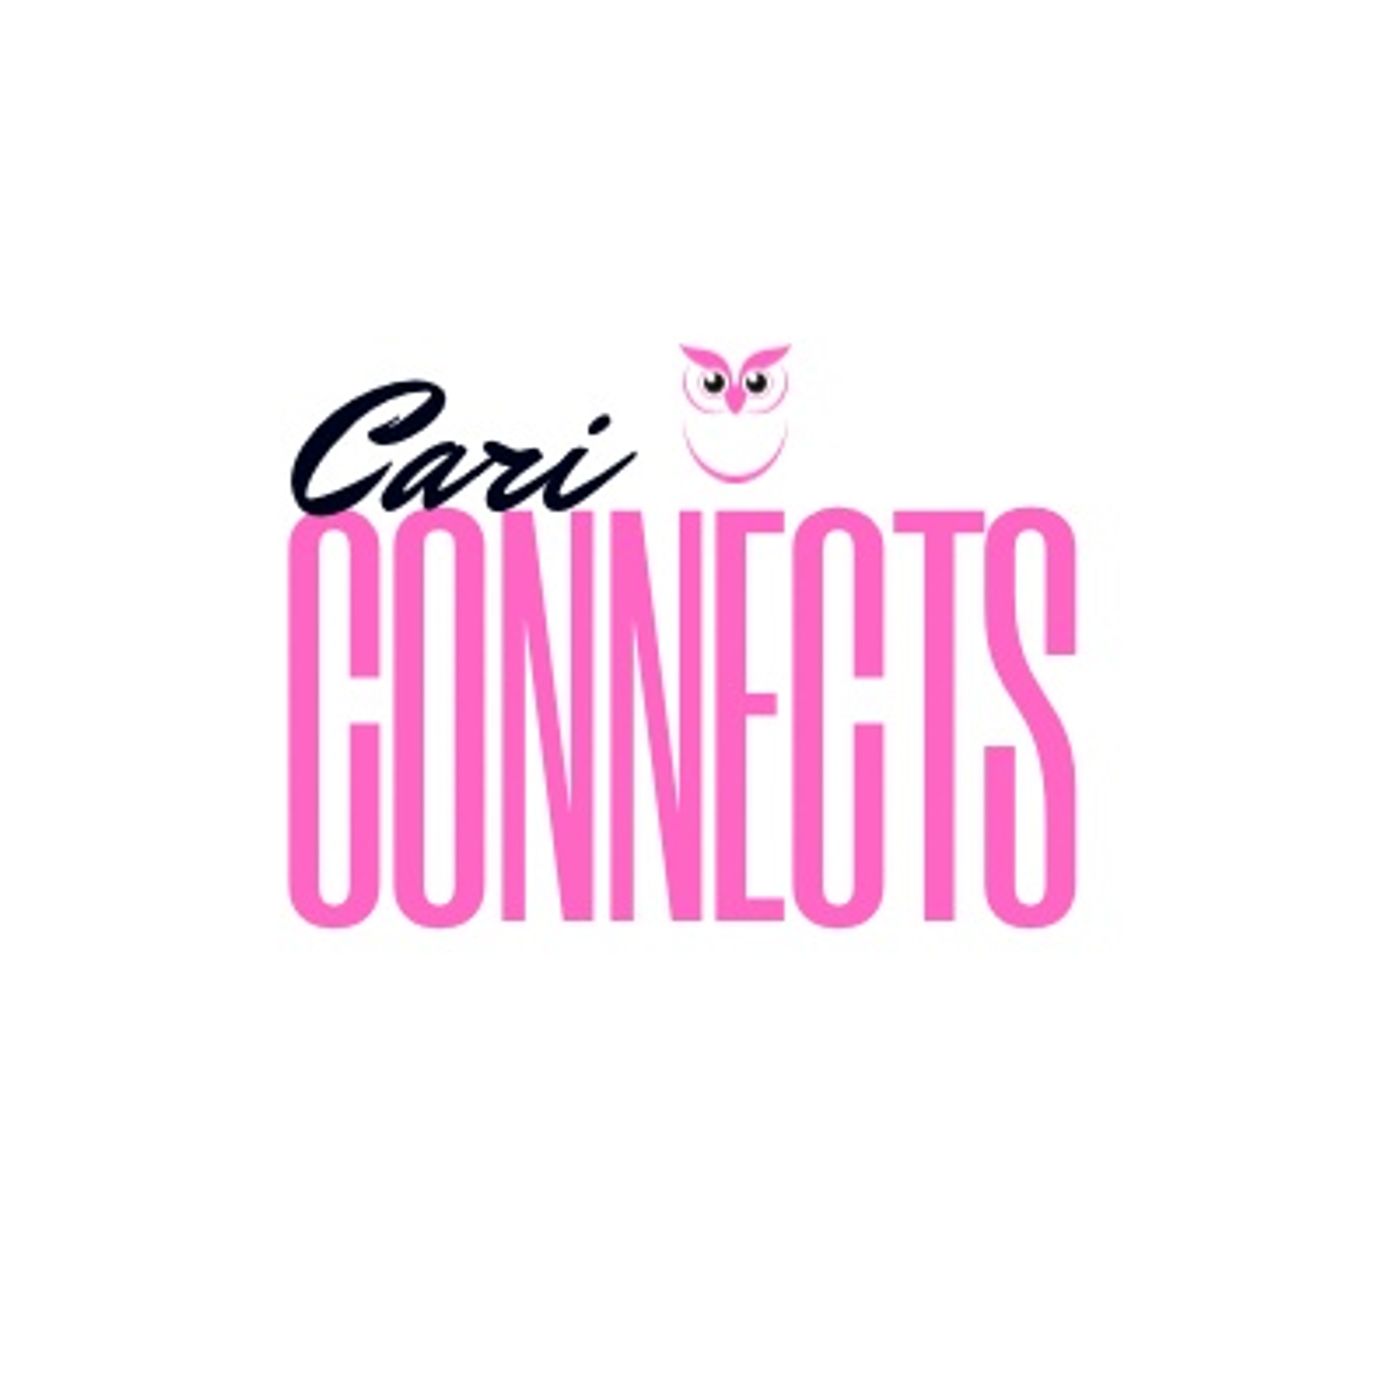 Cari Connects - Oct 31st